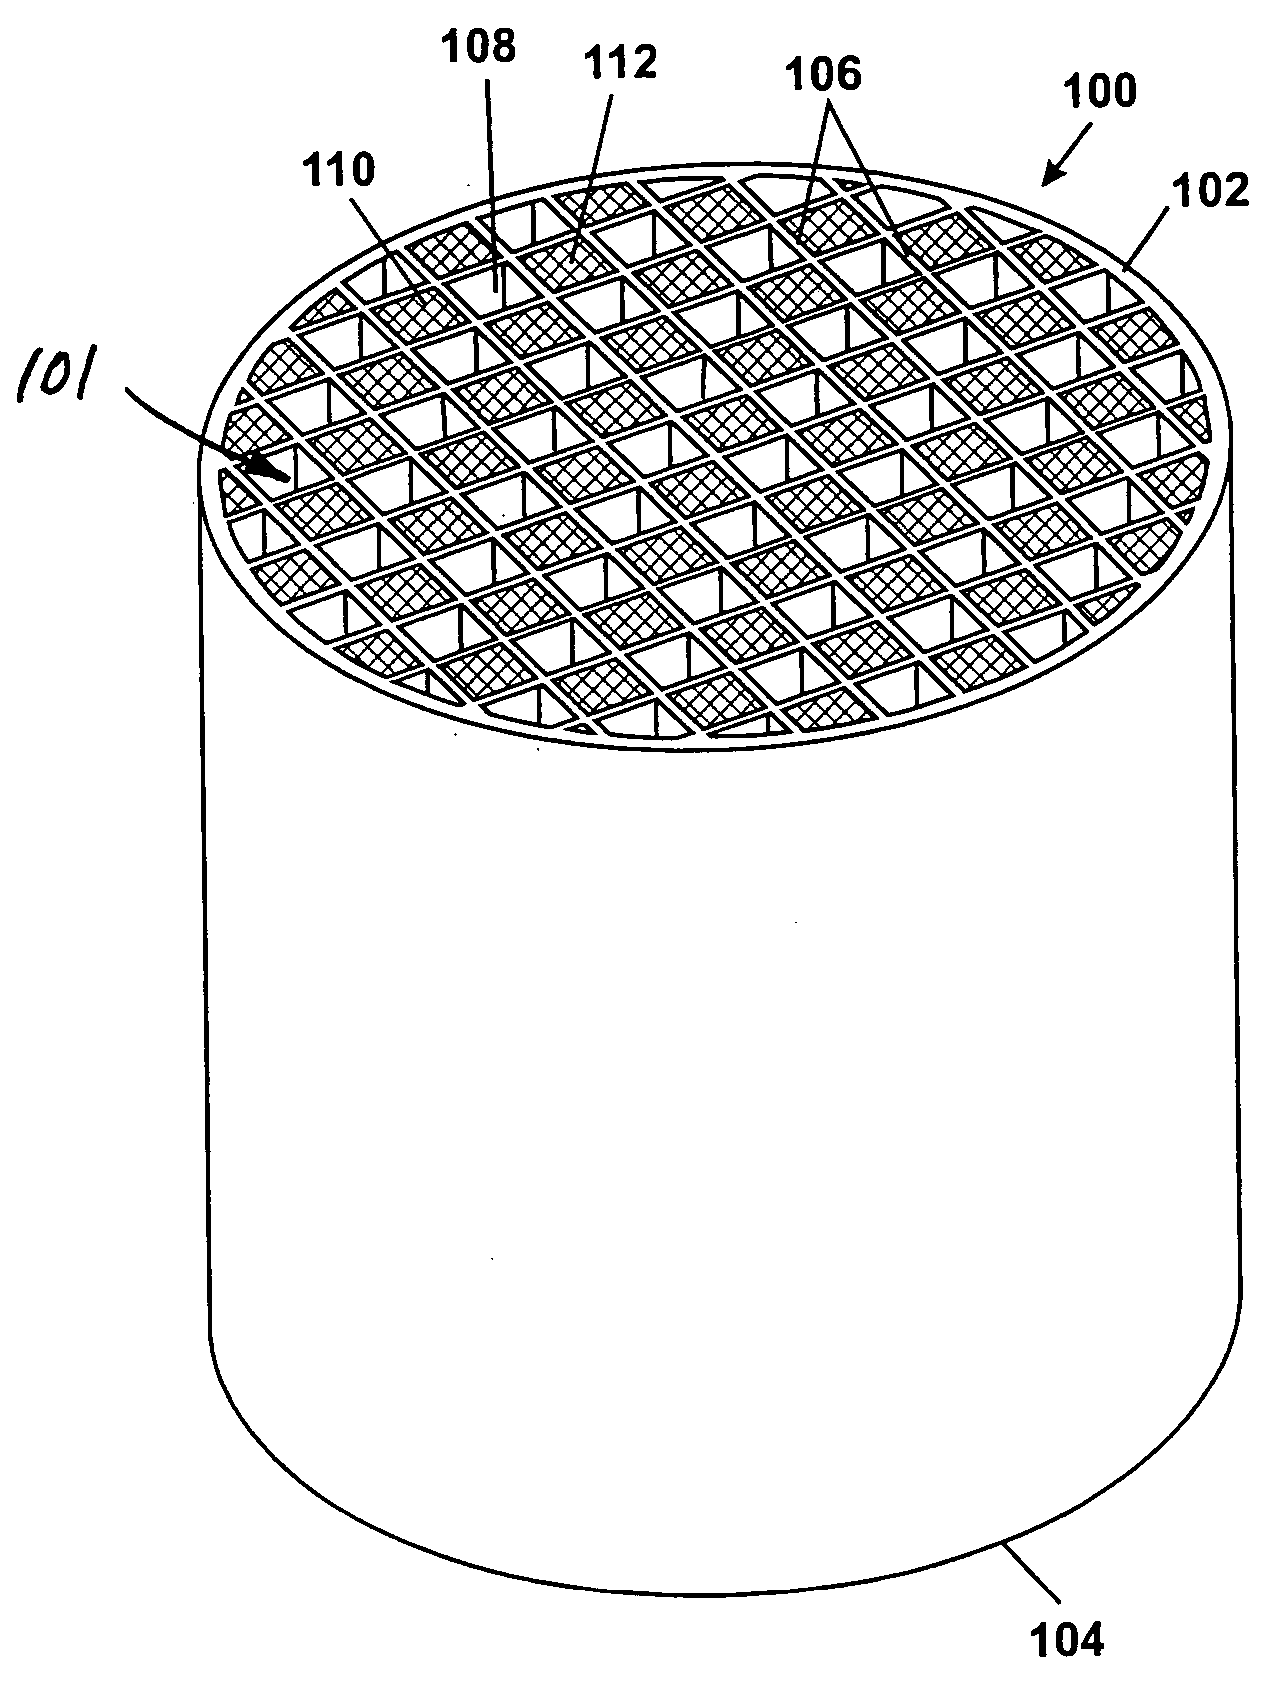 Porous cordierite ceramic honeycomb article with improved strength and method of manufacturing same